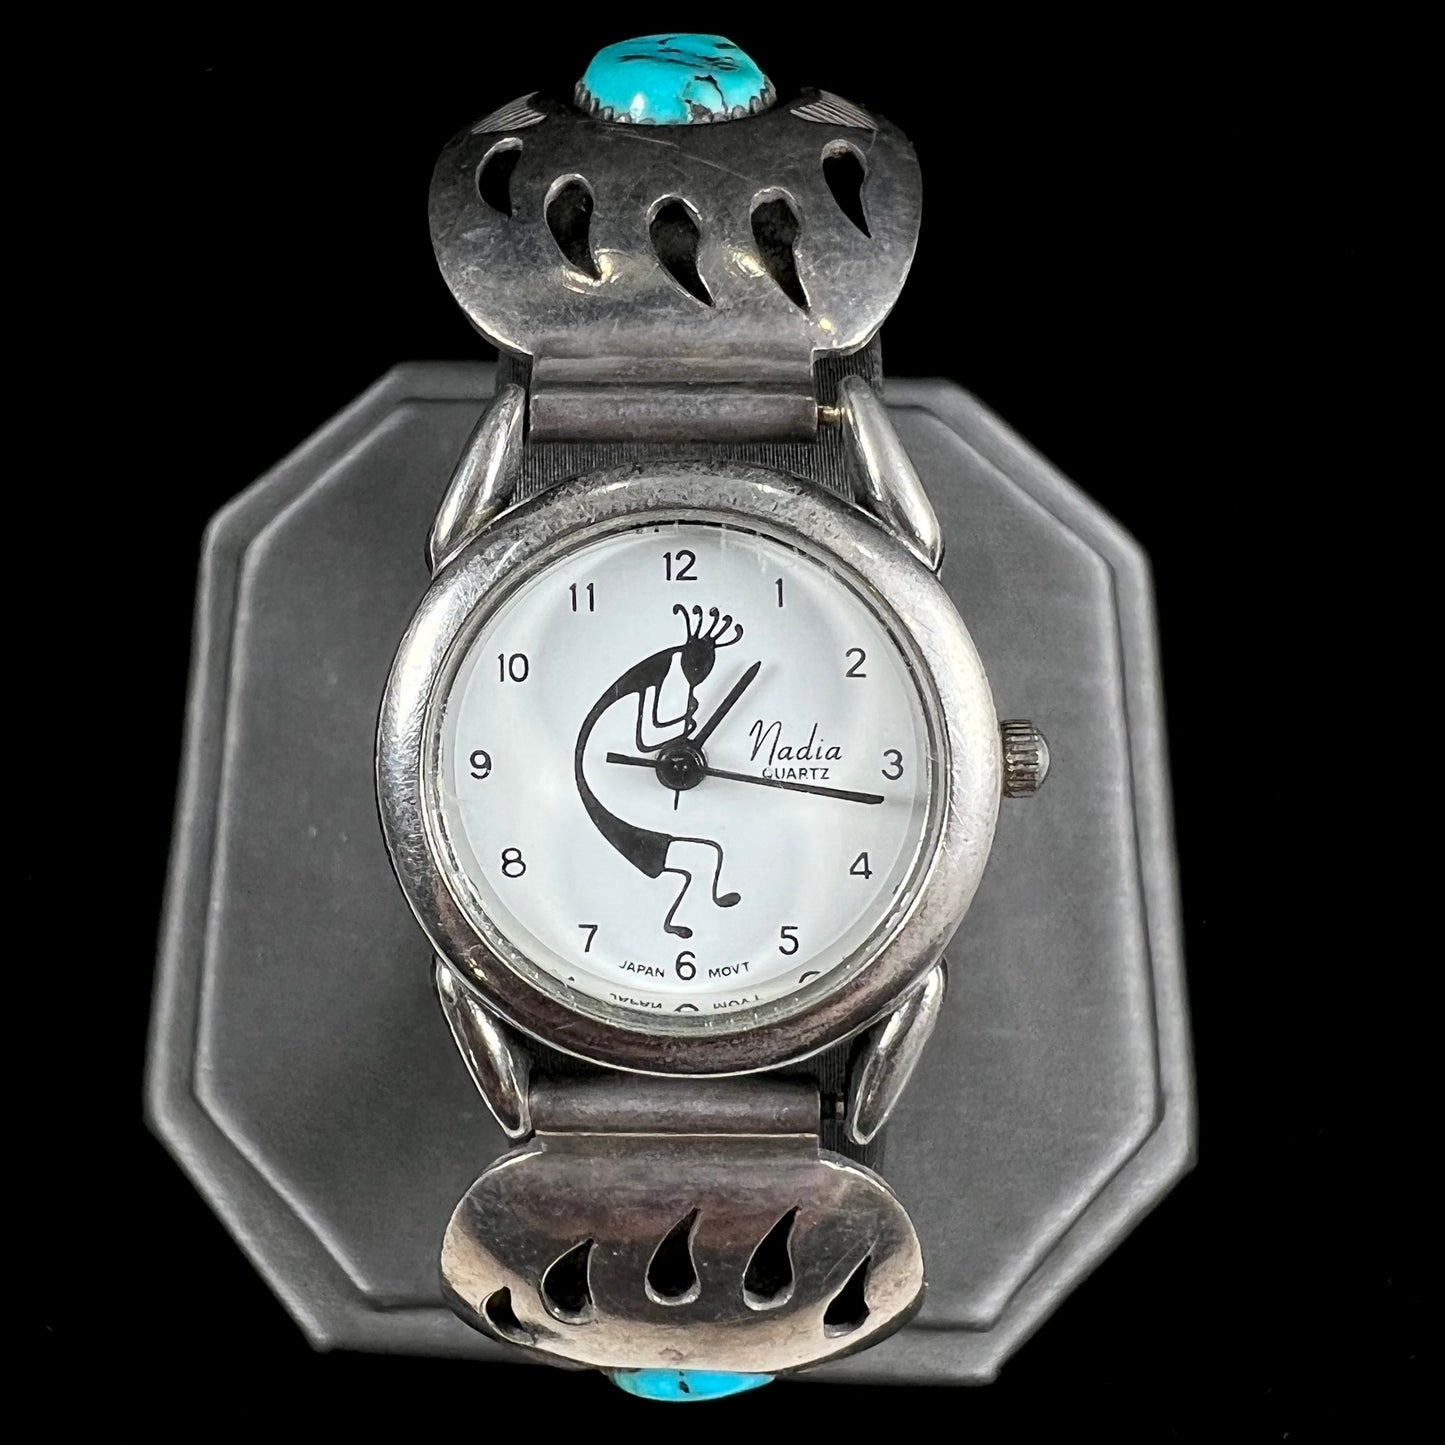 A watch set with two turquoise stones handmade by Navajo artists Arnold and Carleena Goodluck.